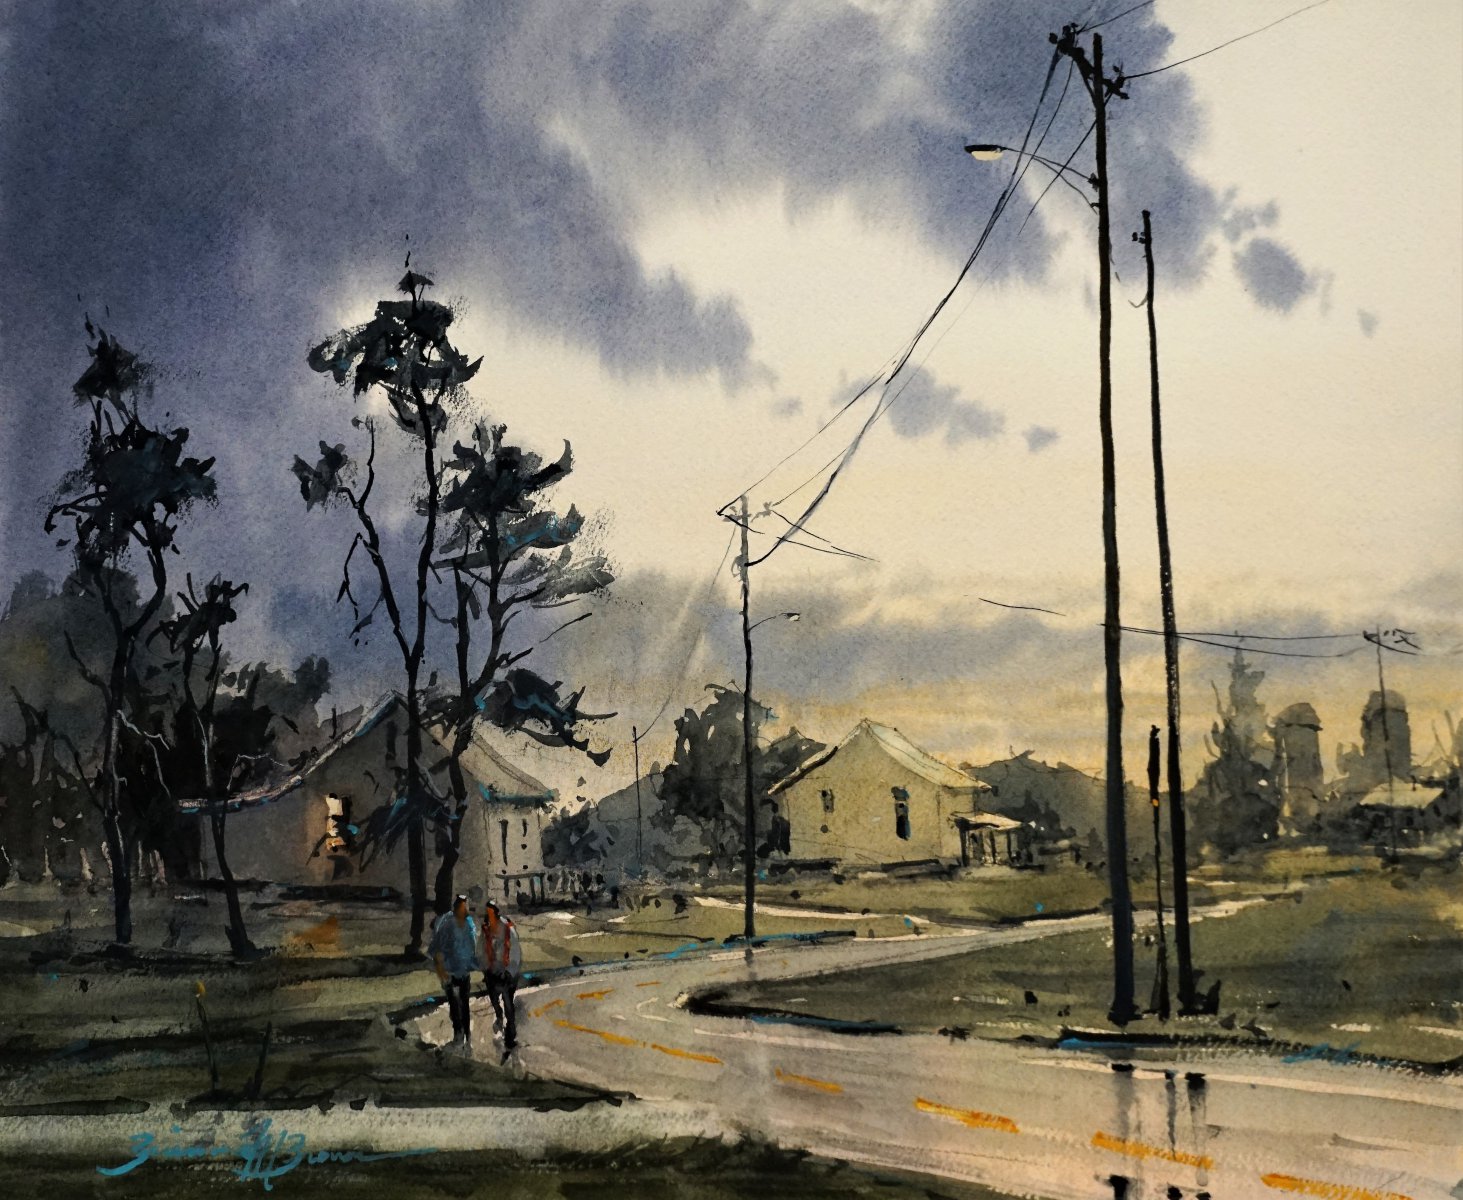 Break From the Storm - Brienne M Brown